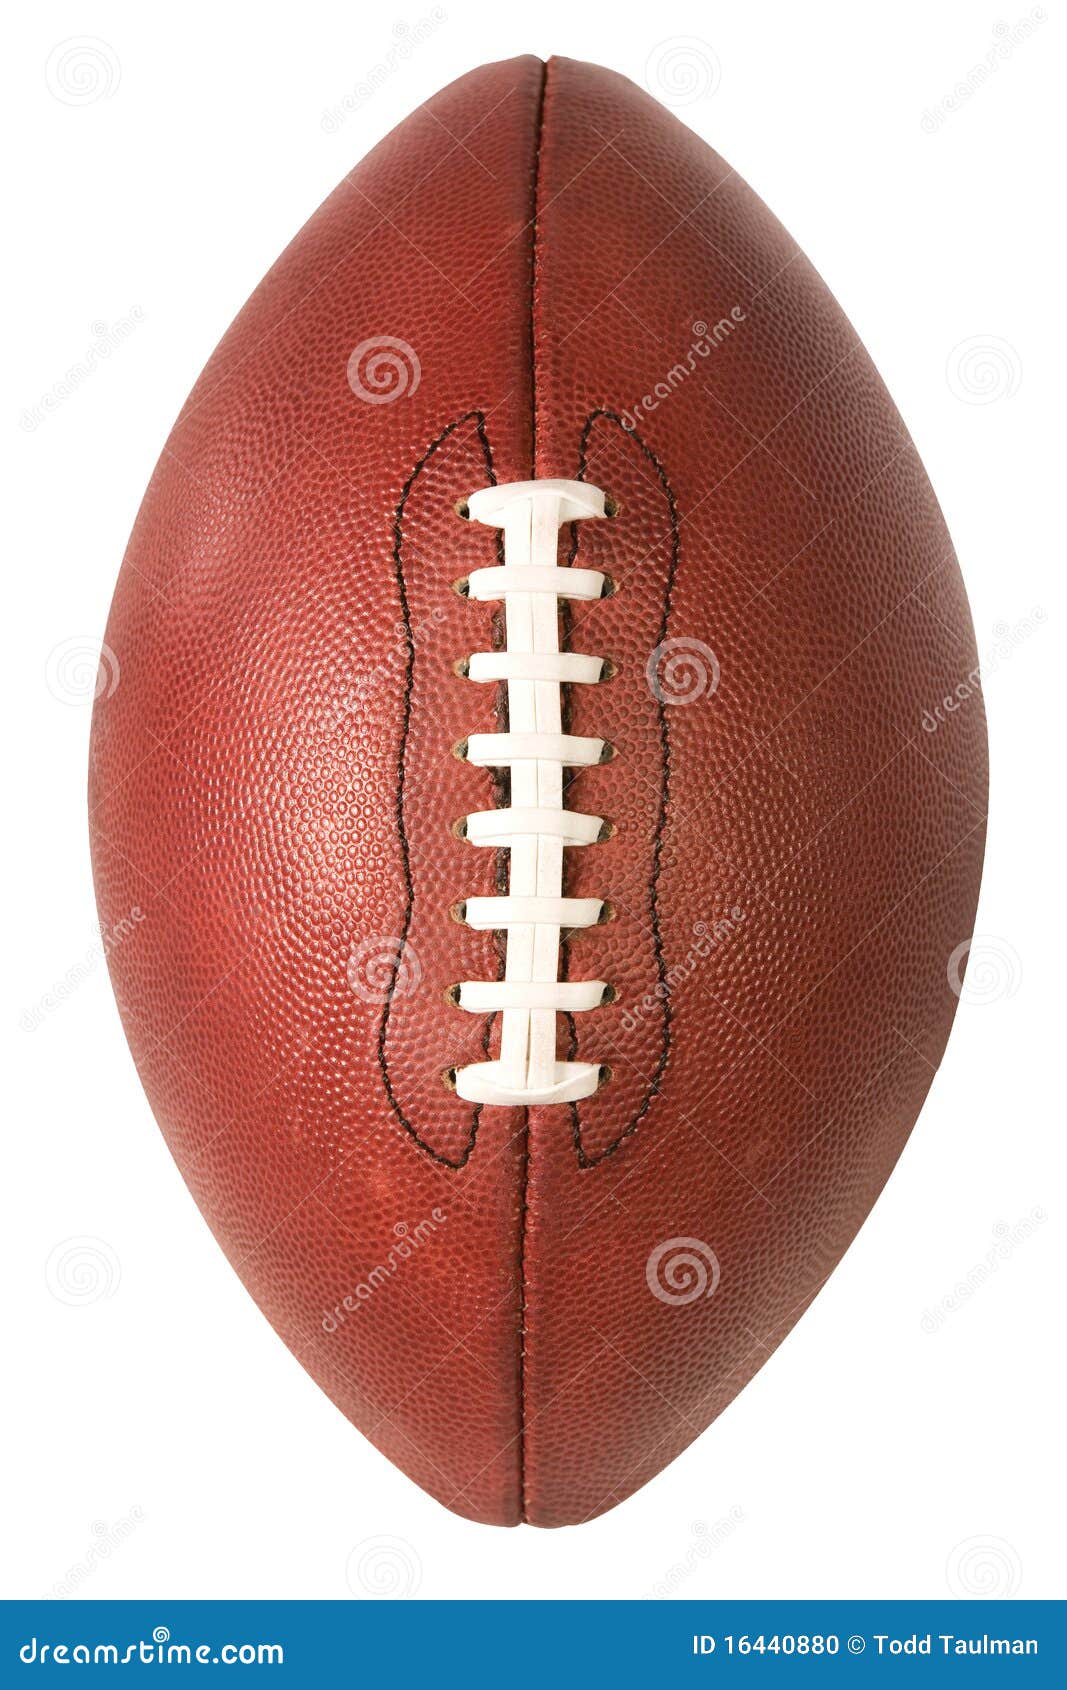 pro football top view